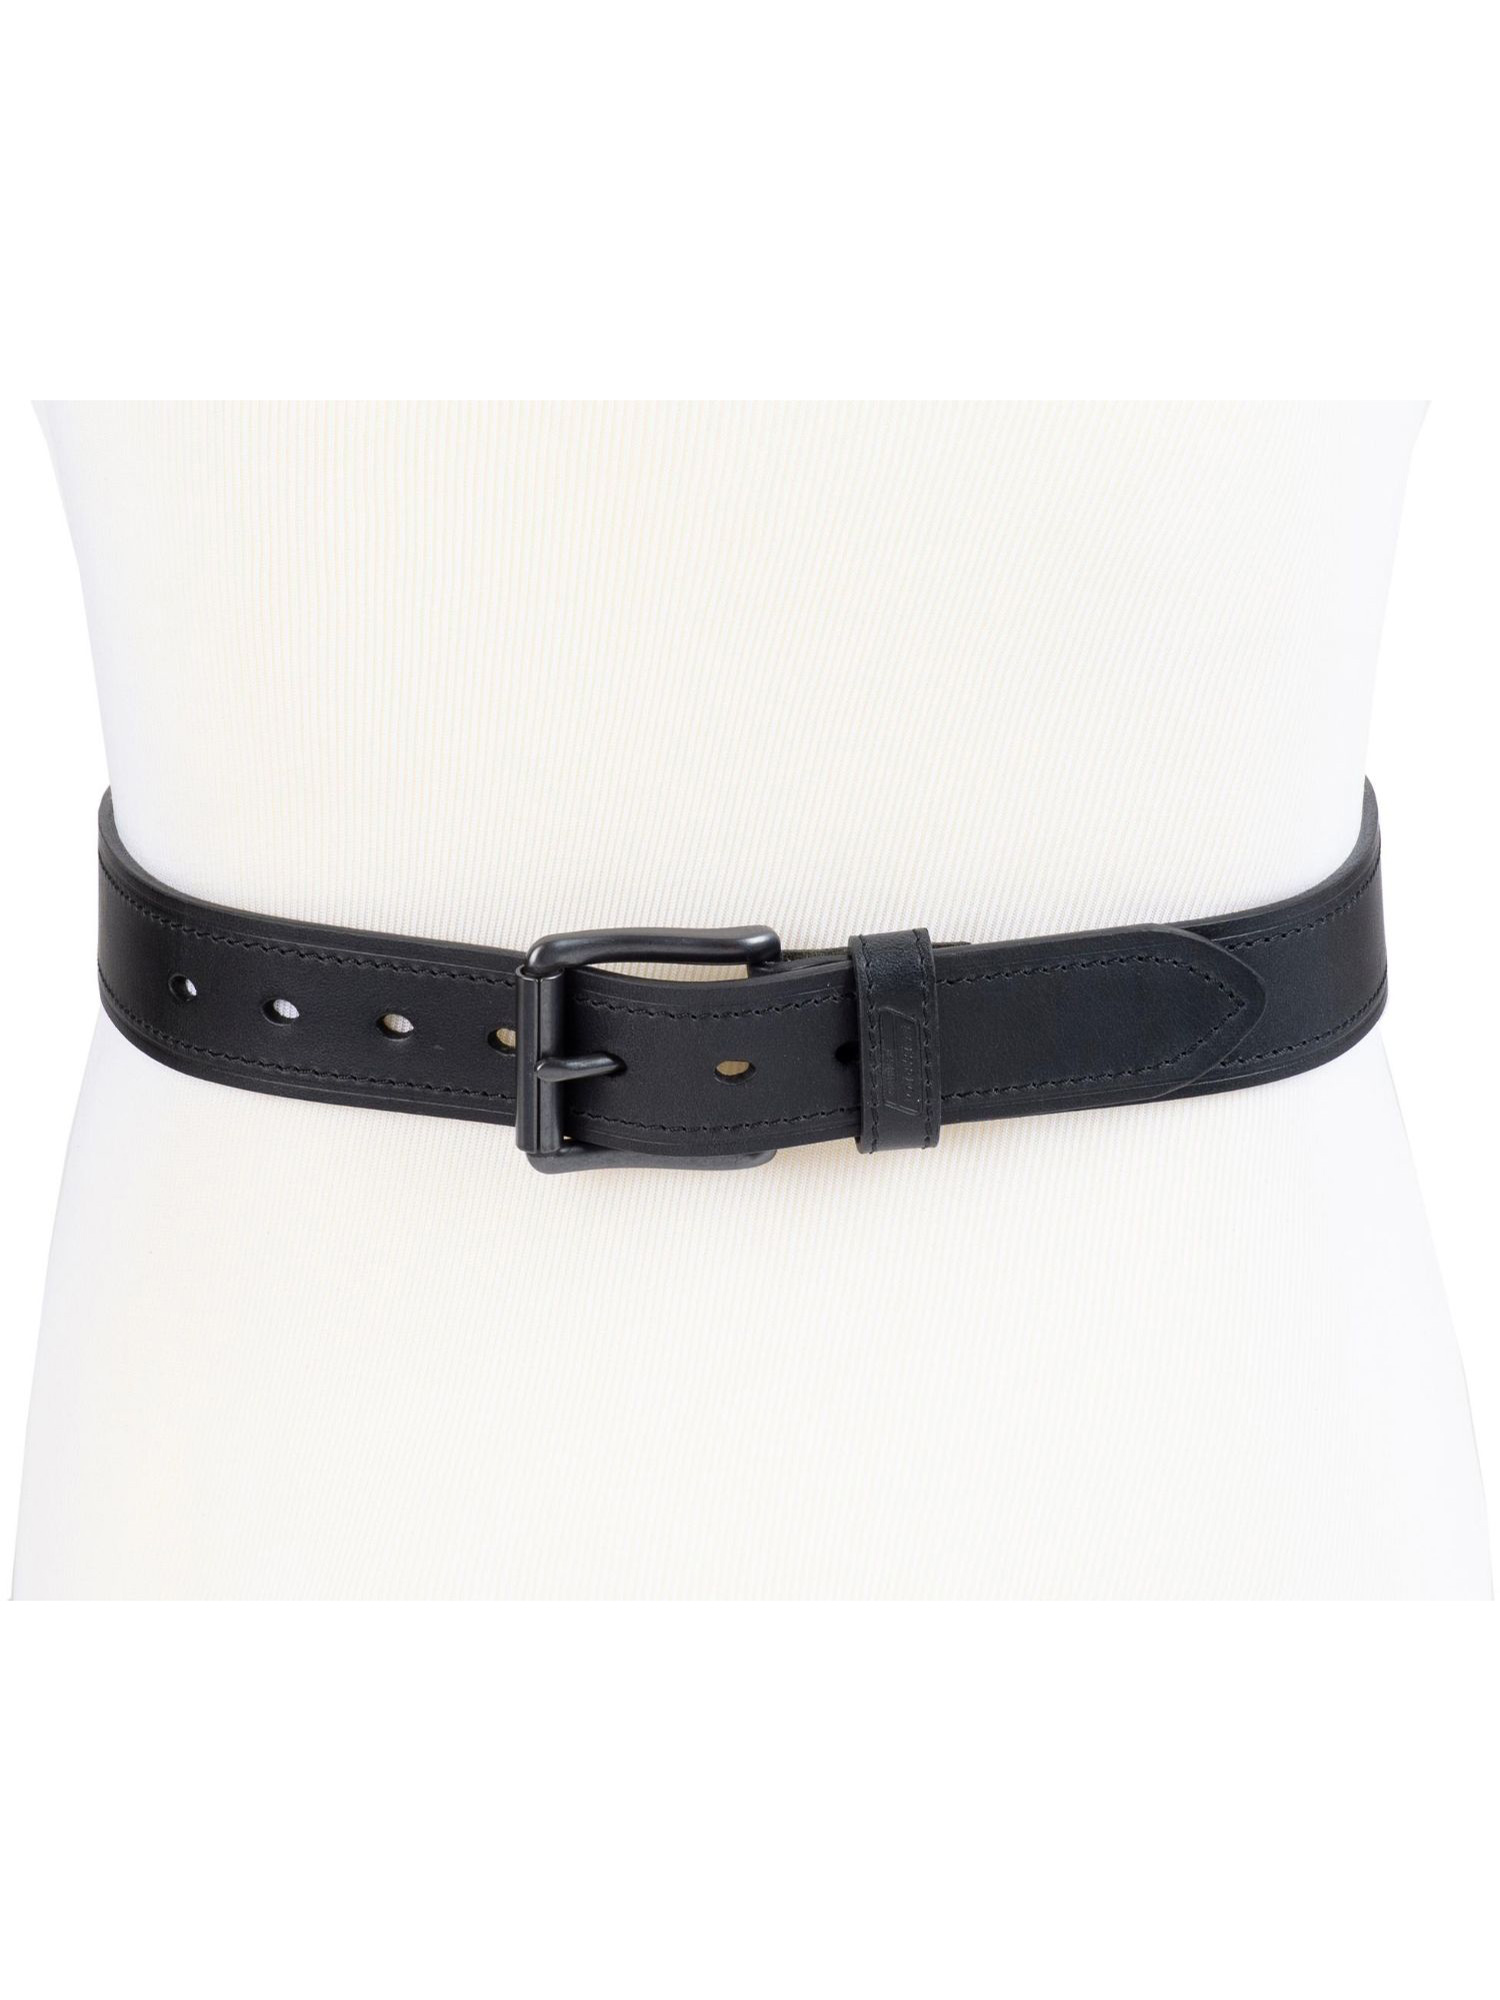 Genuine Dickies Men's Casual Black Leather Work Belt with Roller Buckle (Regular and Big & Tall Sizes) - image 3 of 6